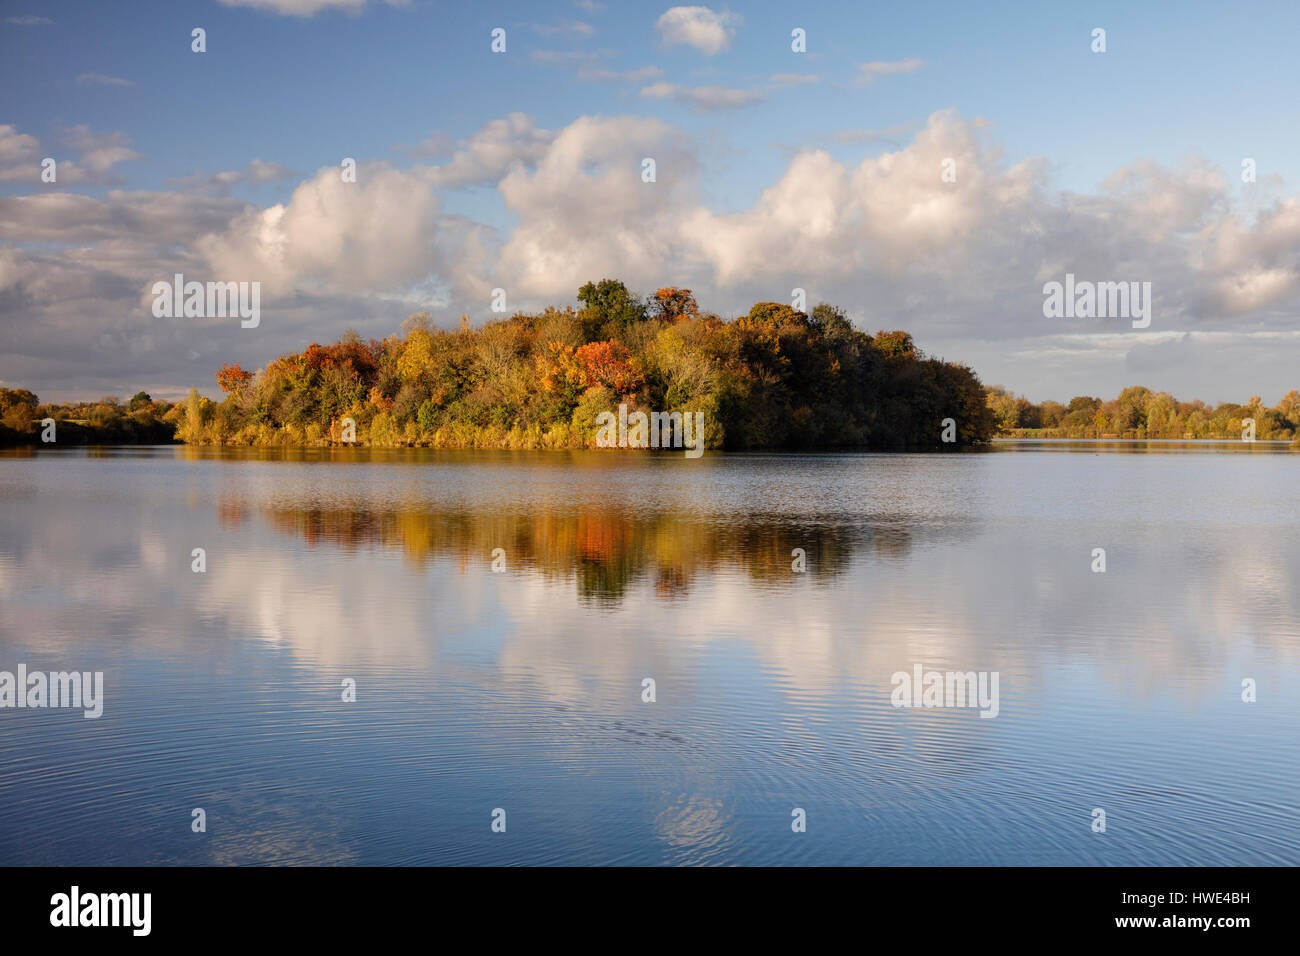 Island covered in autumnal foliage and colour in the centre of Lake 21 near Ashton Keynes in the Cotswold Water Park. Stock Photo